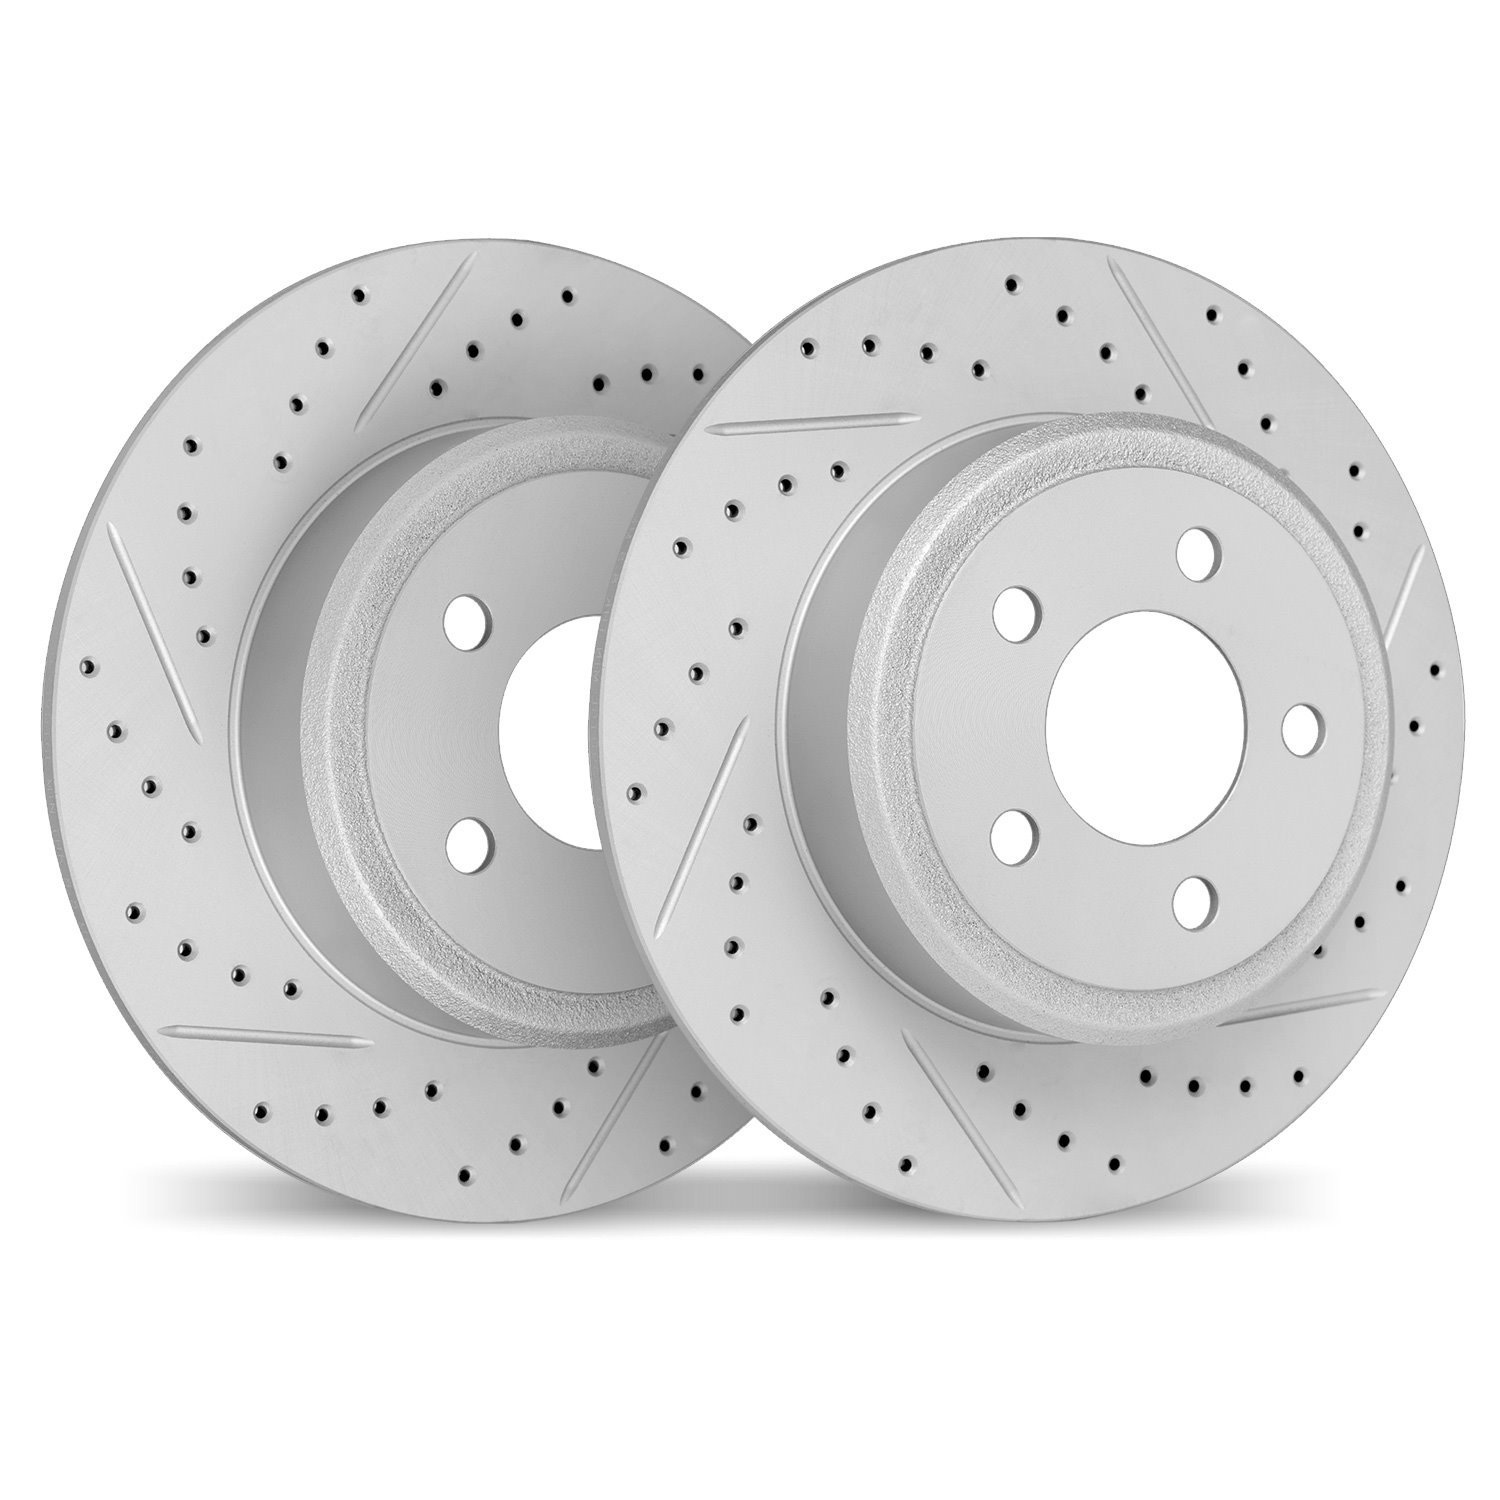 2002-80034 Geoperformance Drilled/Slotted Brake Rotors, 2006-2015 Ford/Lincoln/Mercury/Mazda, Position: Rear